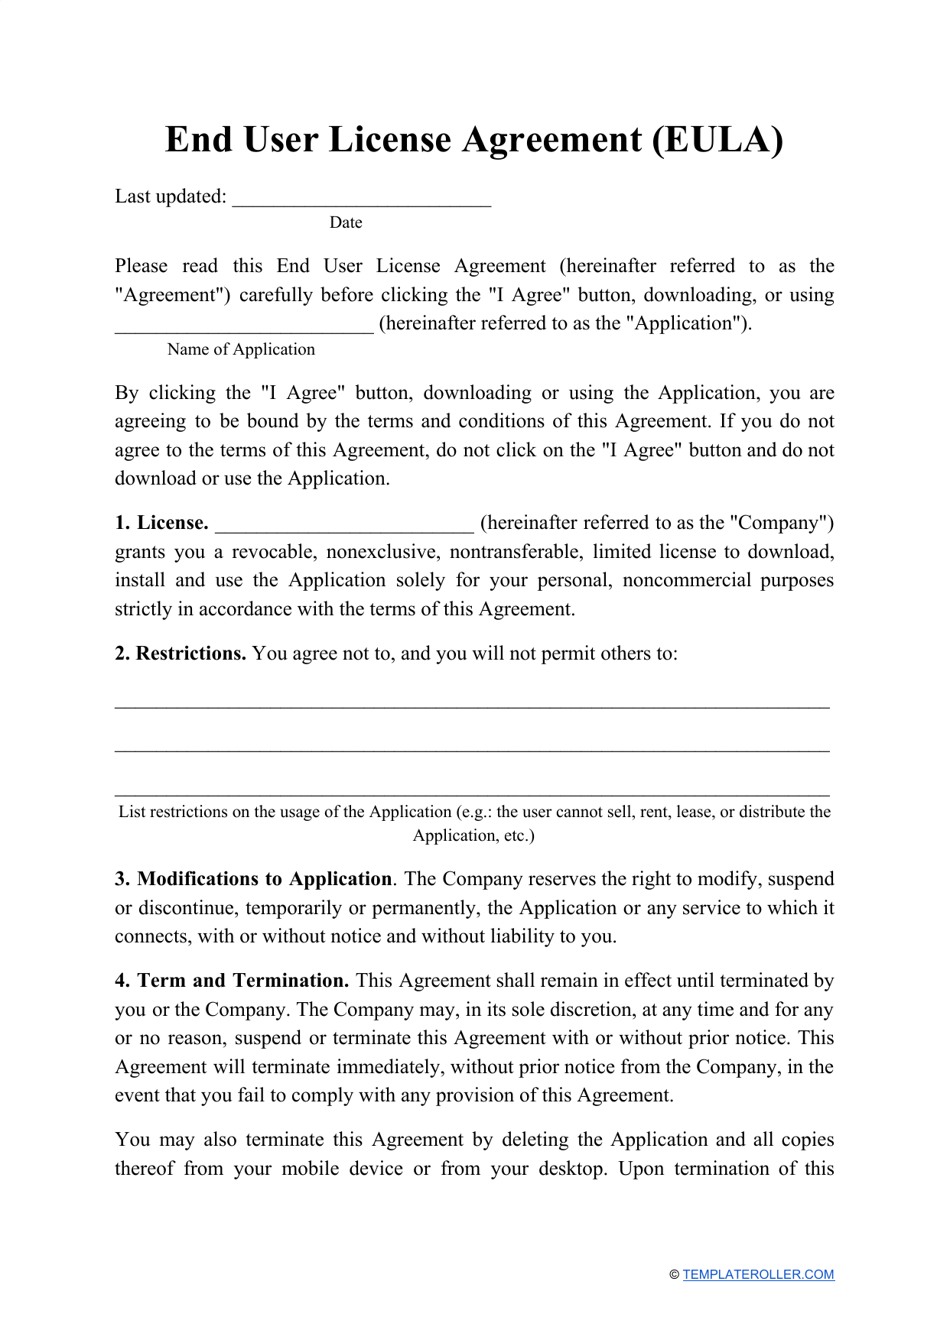 End User License Agreement Template, Page 1